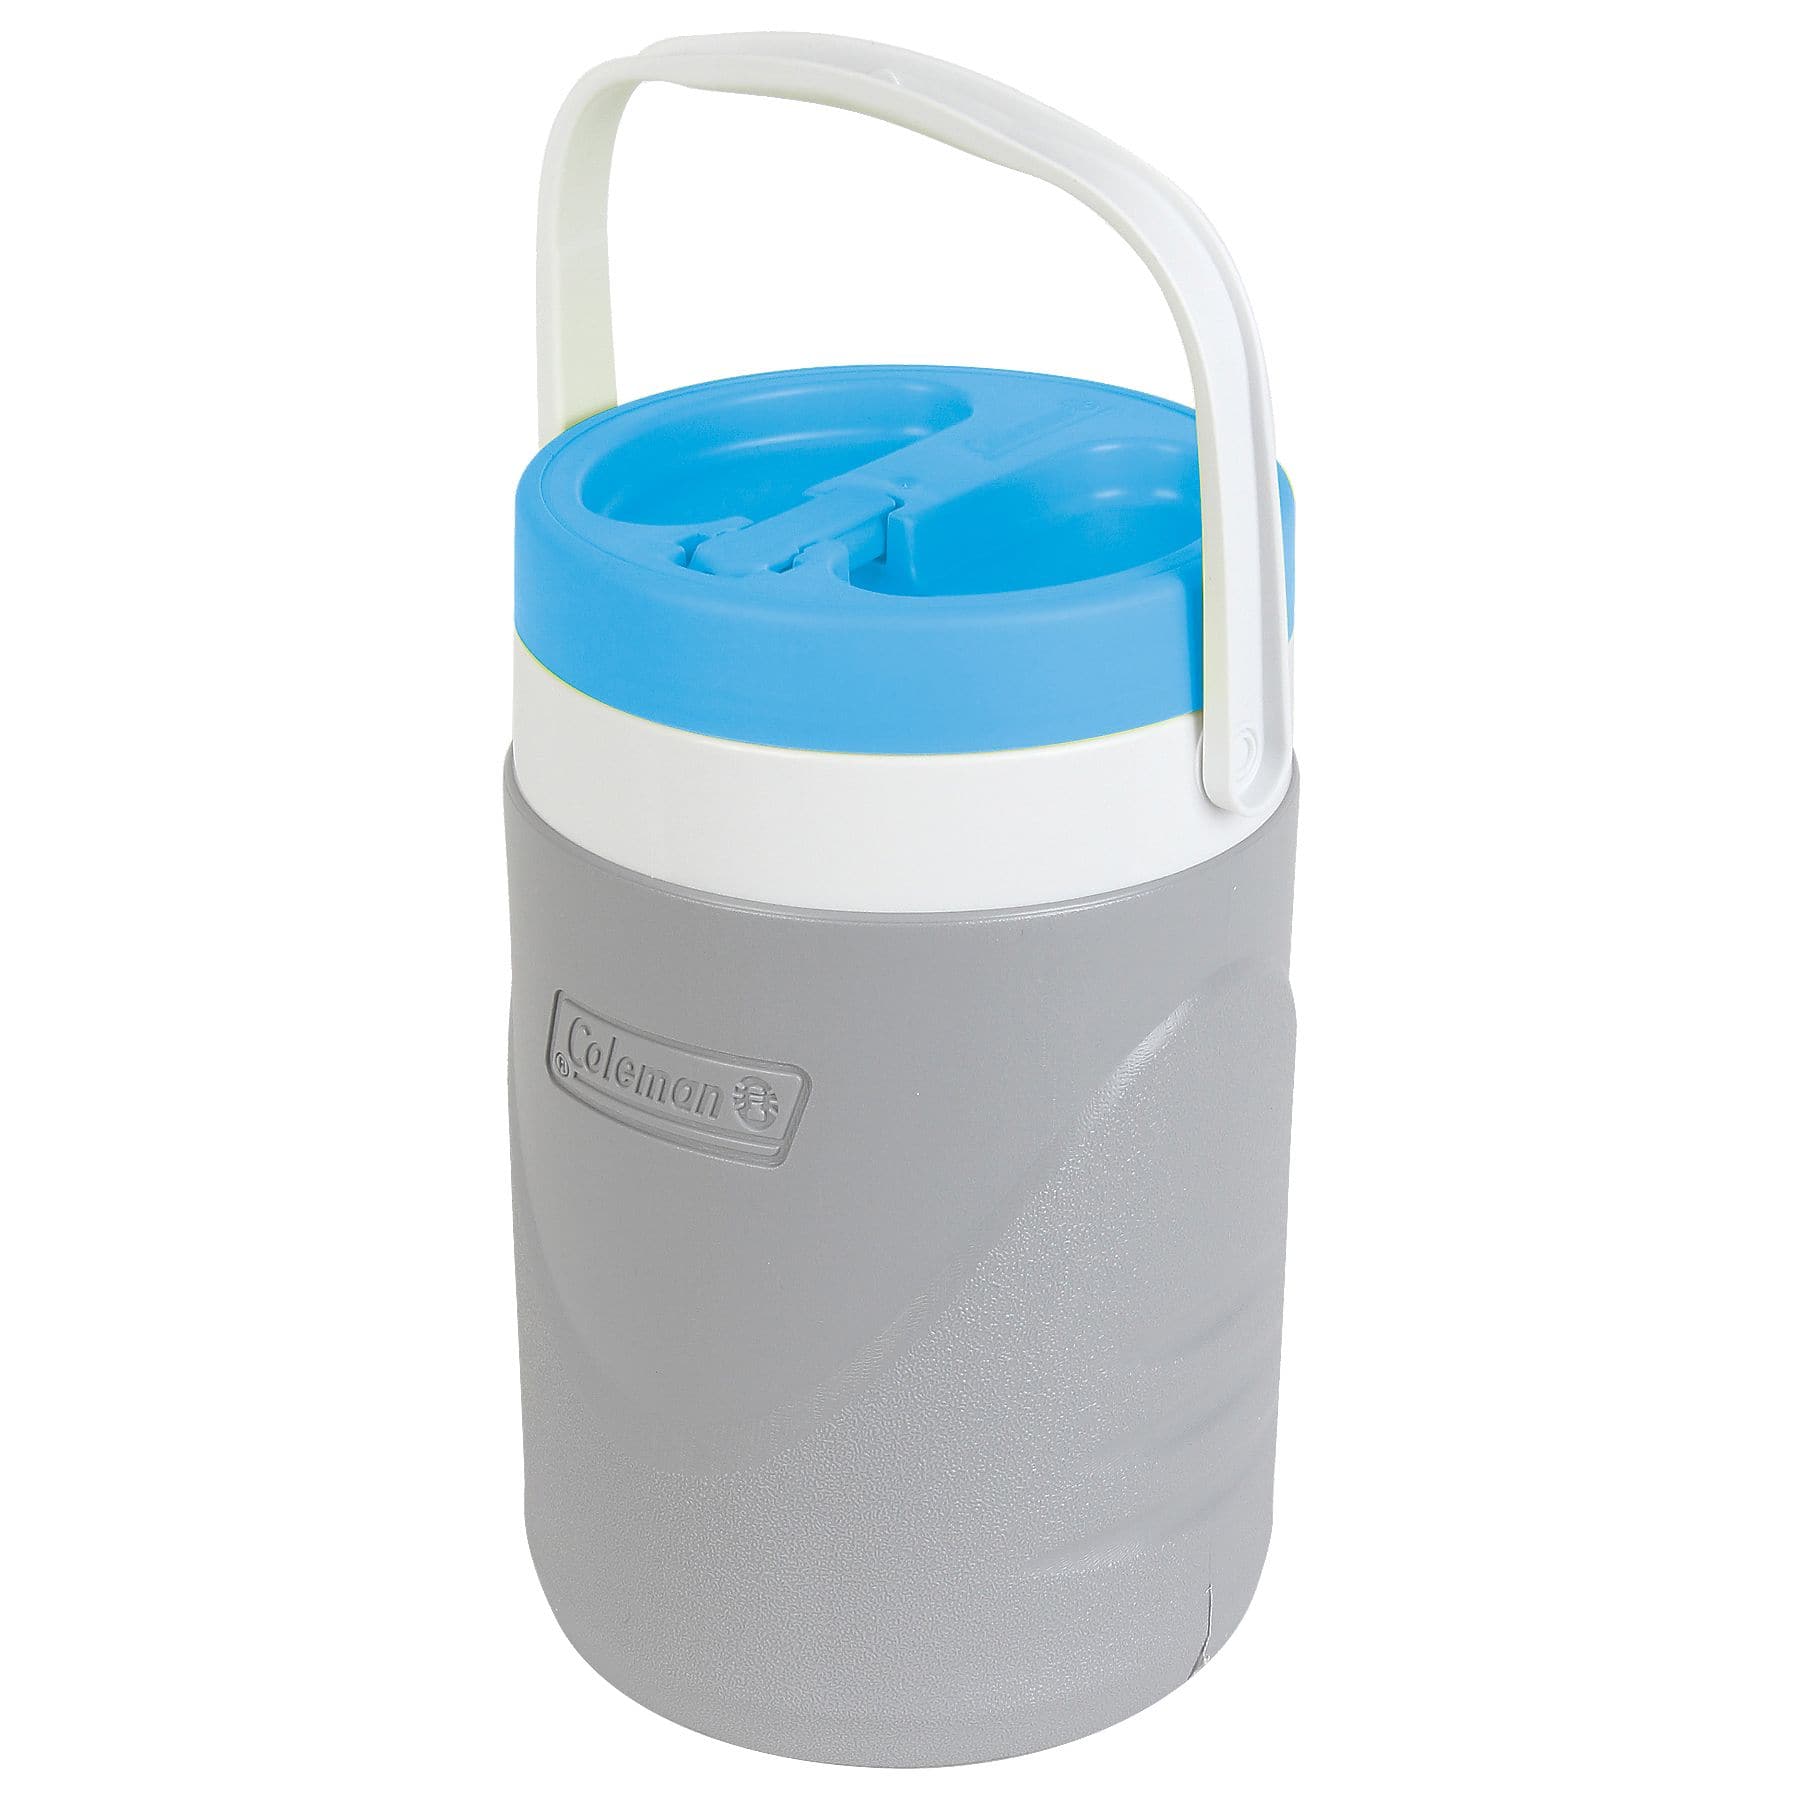 https://media-www.canadiantire.ca/product/playing/camping/hydration-coolers/0854072/coleman-1-gal-jug-antimicrobial-lining-075ca729-dd58-41c2-afd4-0f618b2ee51e-jpgrendition.jpg